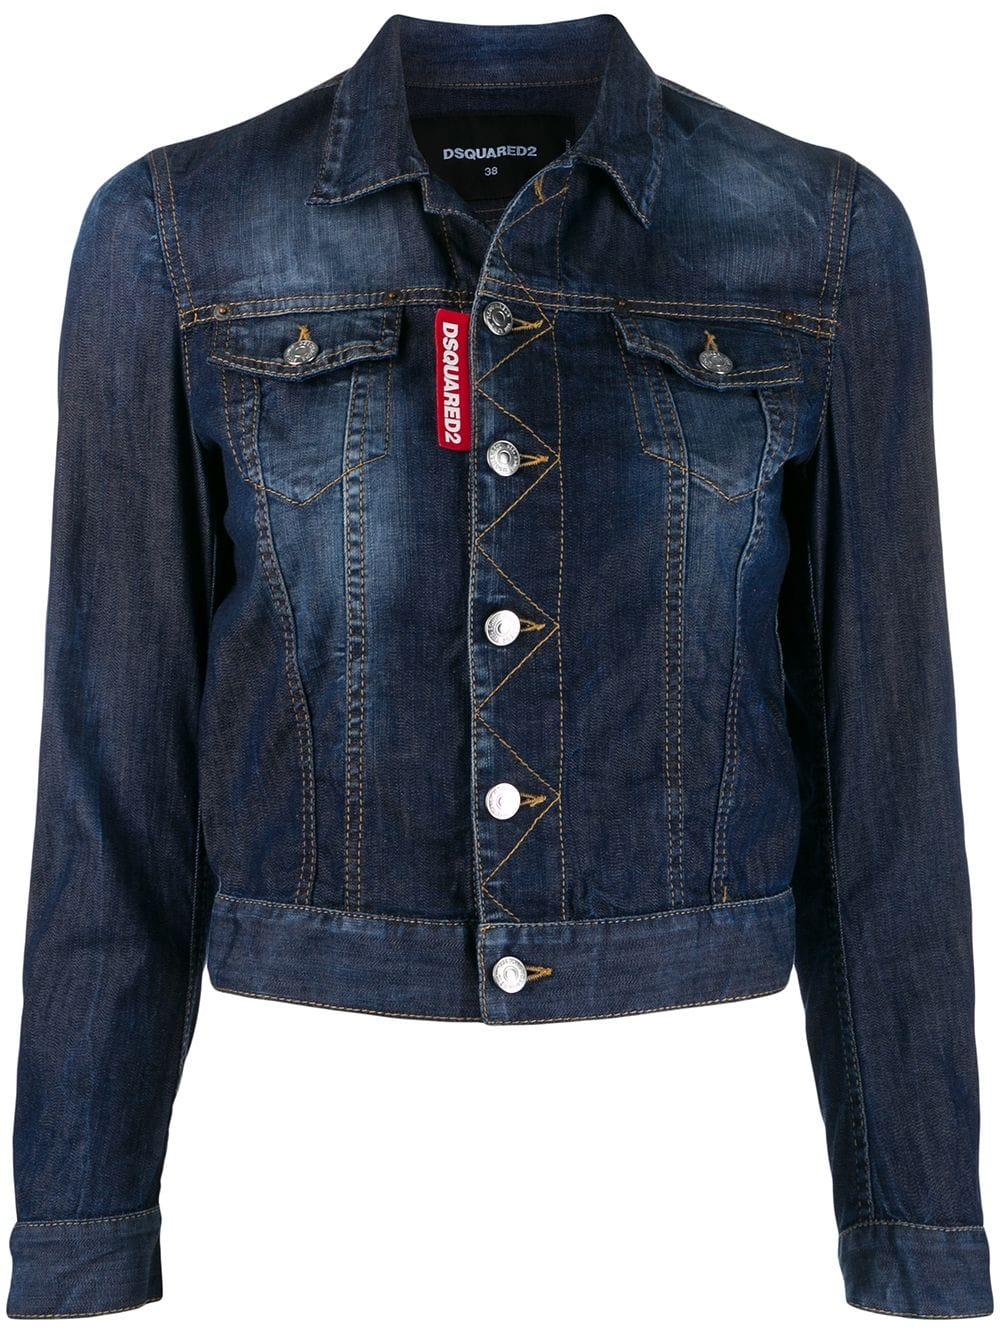 DSquared² Cropped Denim Jacket in Blue - Lyst